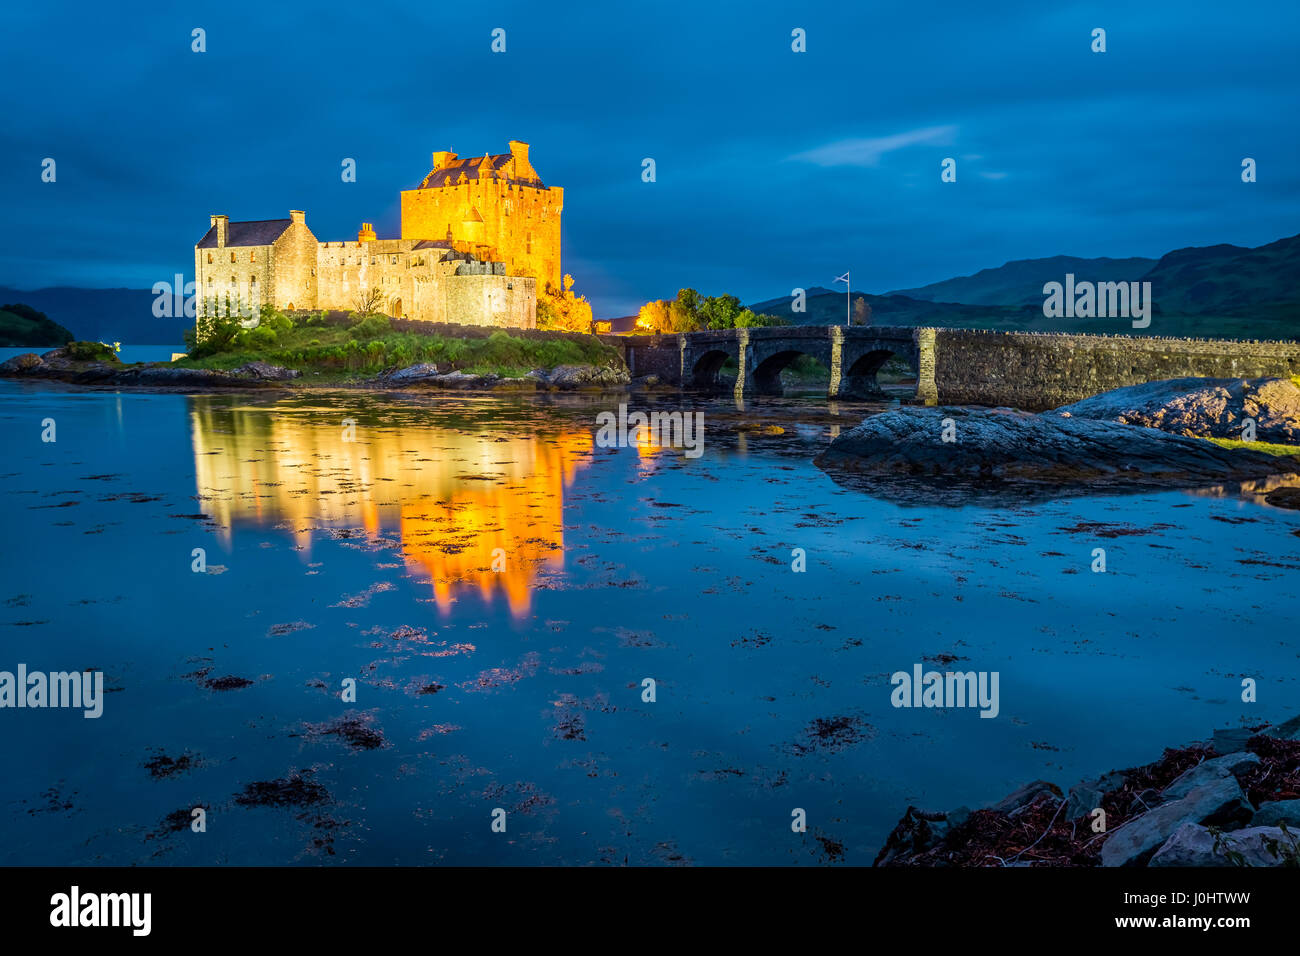 Stunning sunset over lake at Eilean Donan Castle in Scotland Stock Photo